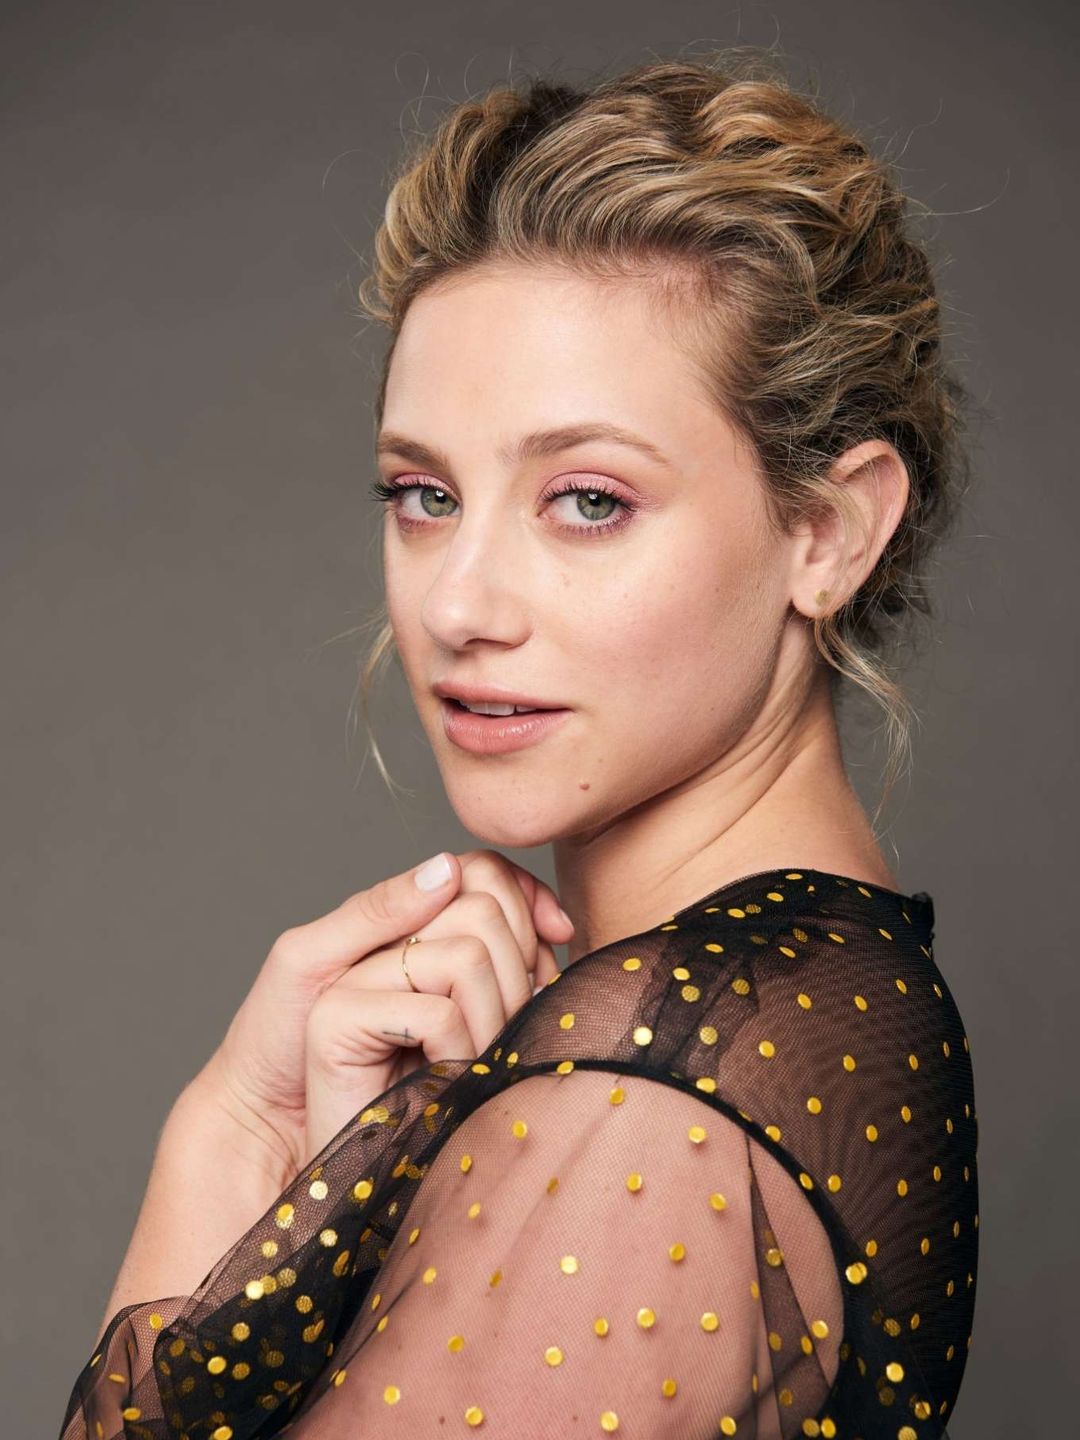 Lili Reinhart unphotoshopped pictures